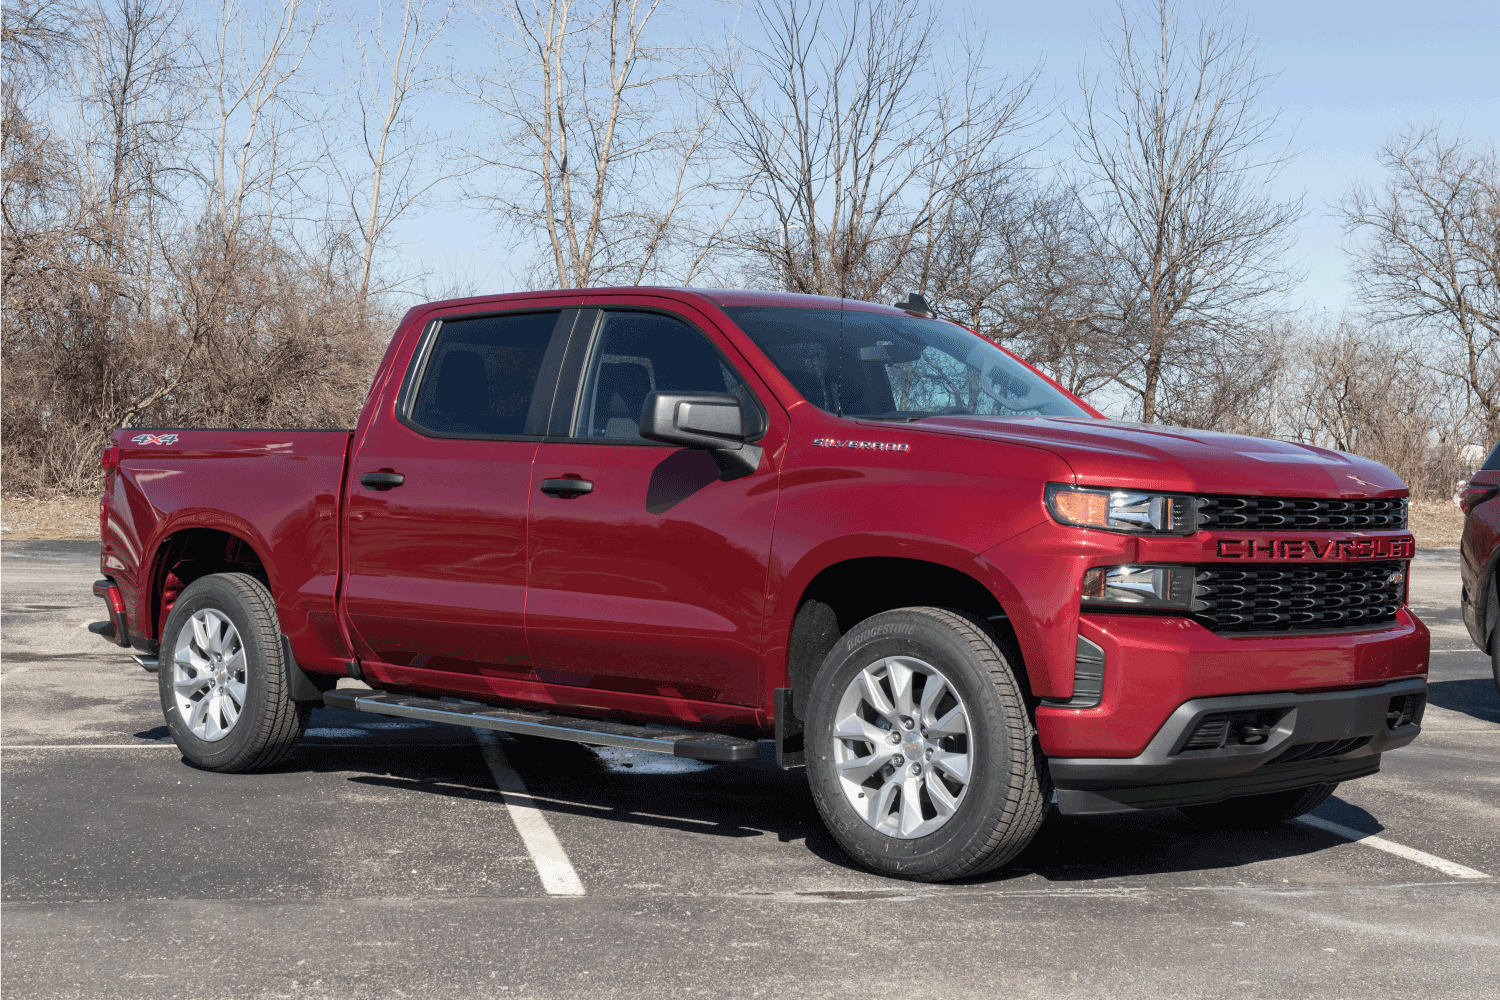 red chevrolet silverado parked on a open parking space with woods in the background